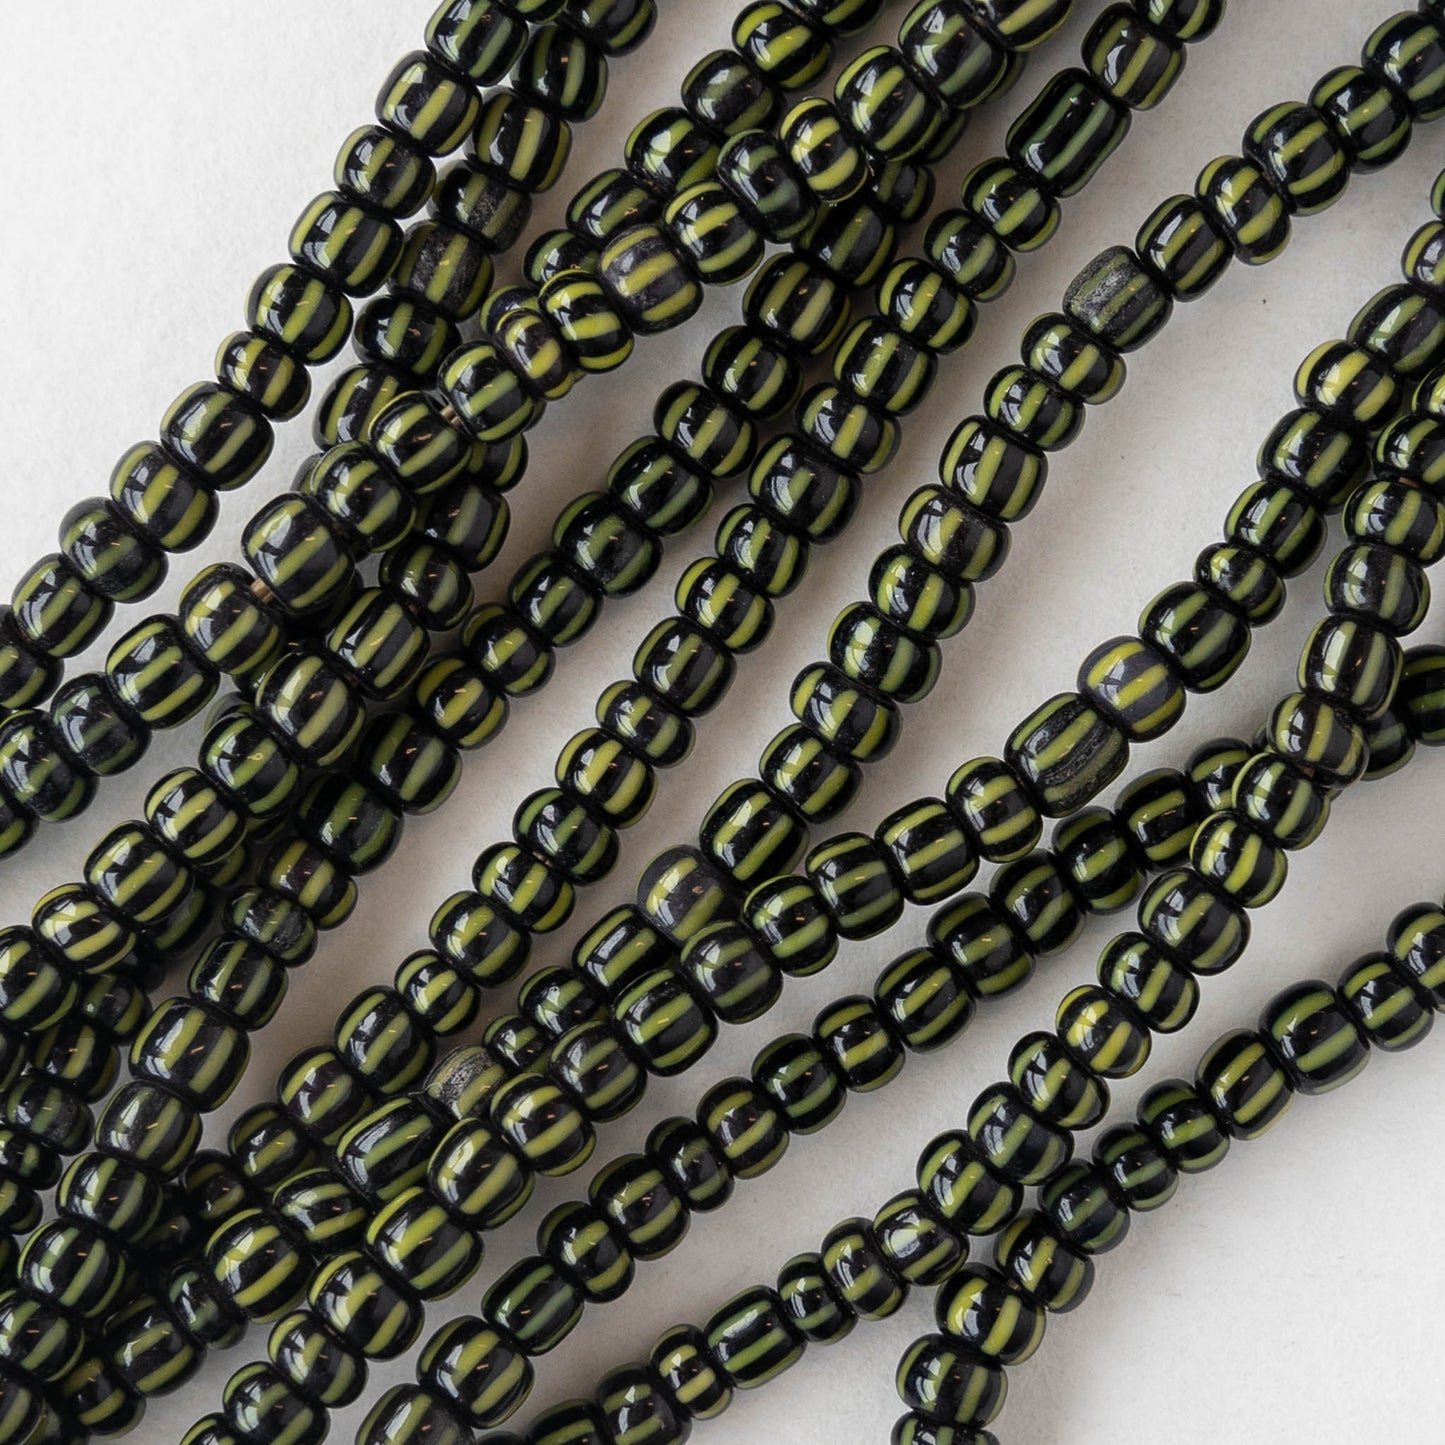 Seed Beads - Black and Green Stripes - 14 Inch Strand